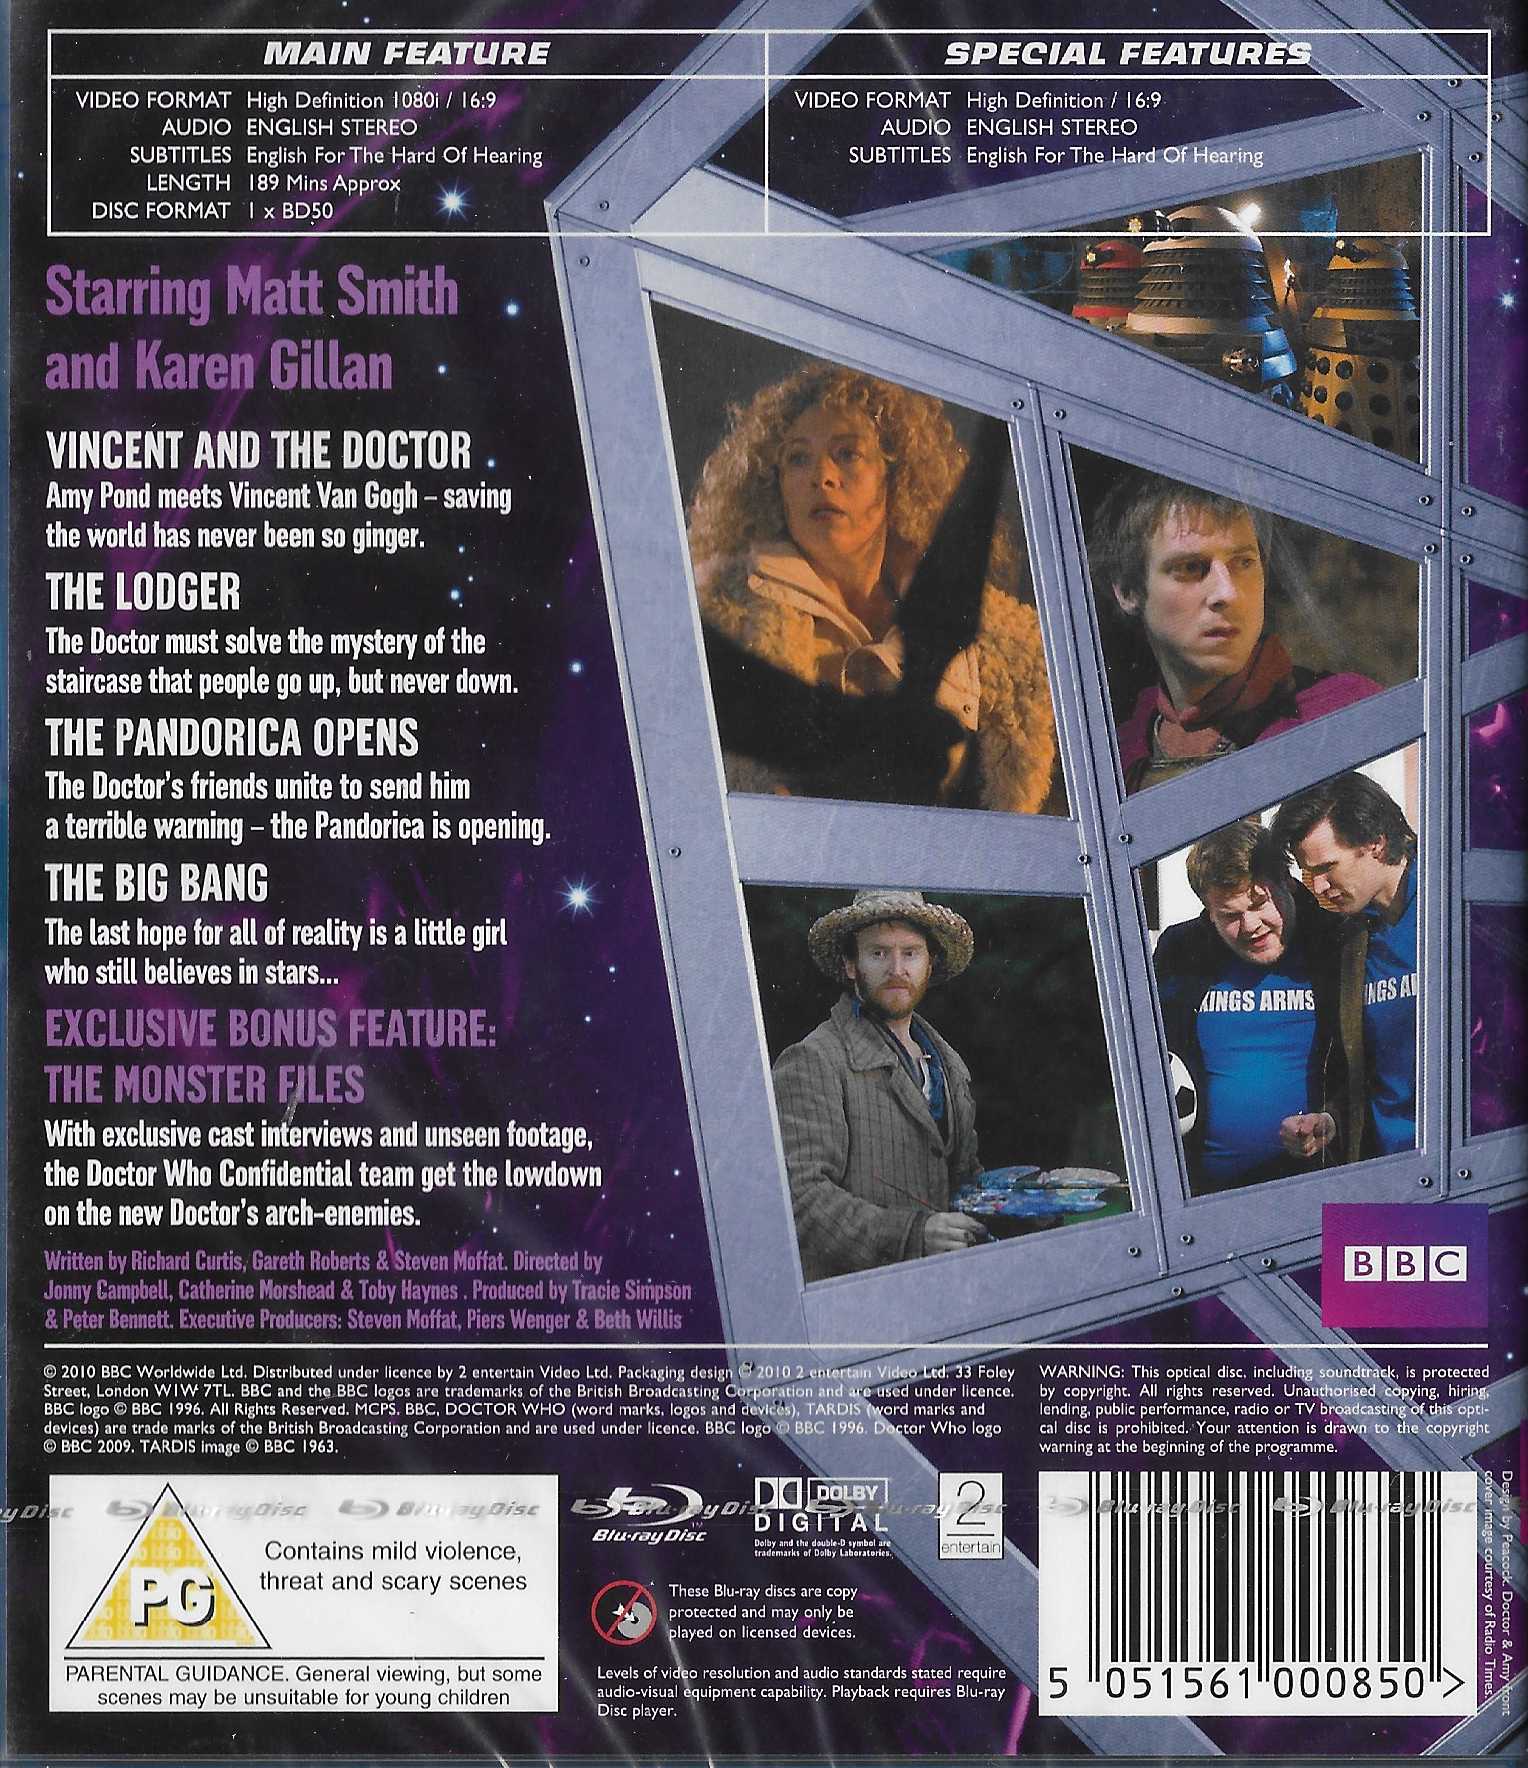 Picture of BBCBD 0085 Doctor Who - Series 5, volume 4 by artist Richard Curtis / Gareth Roberts / Steven Moffatt from the BBC records and Tapes library